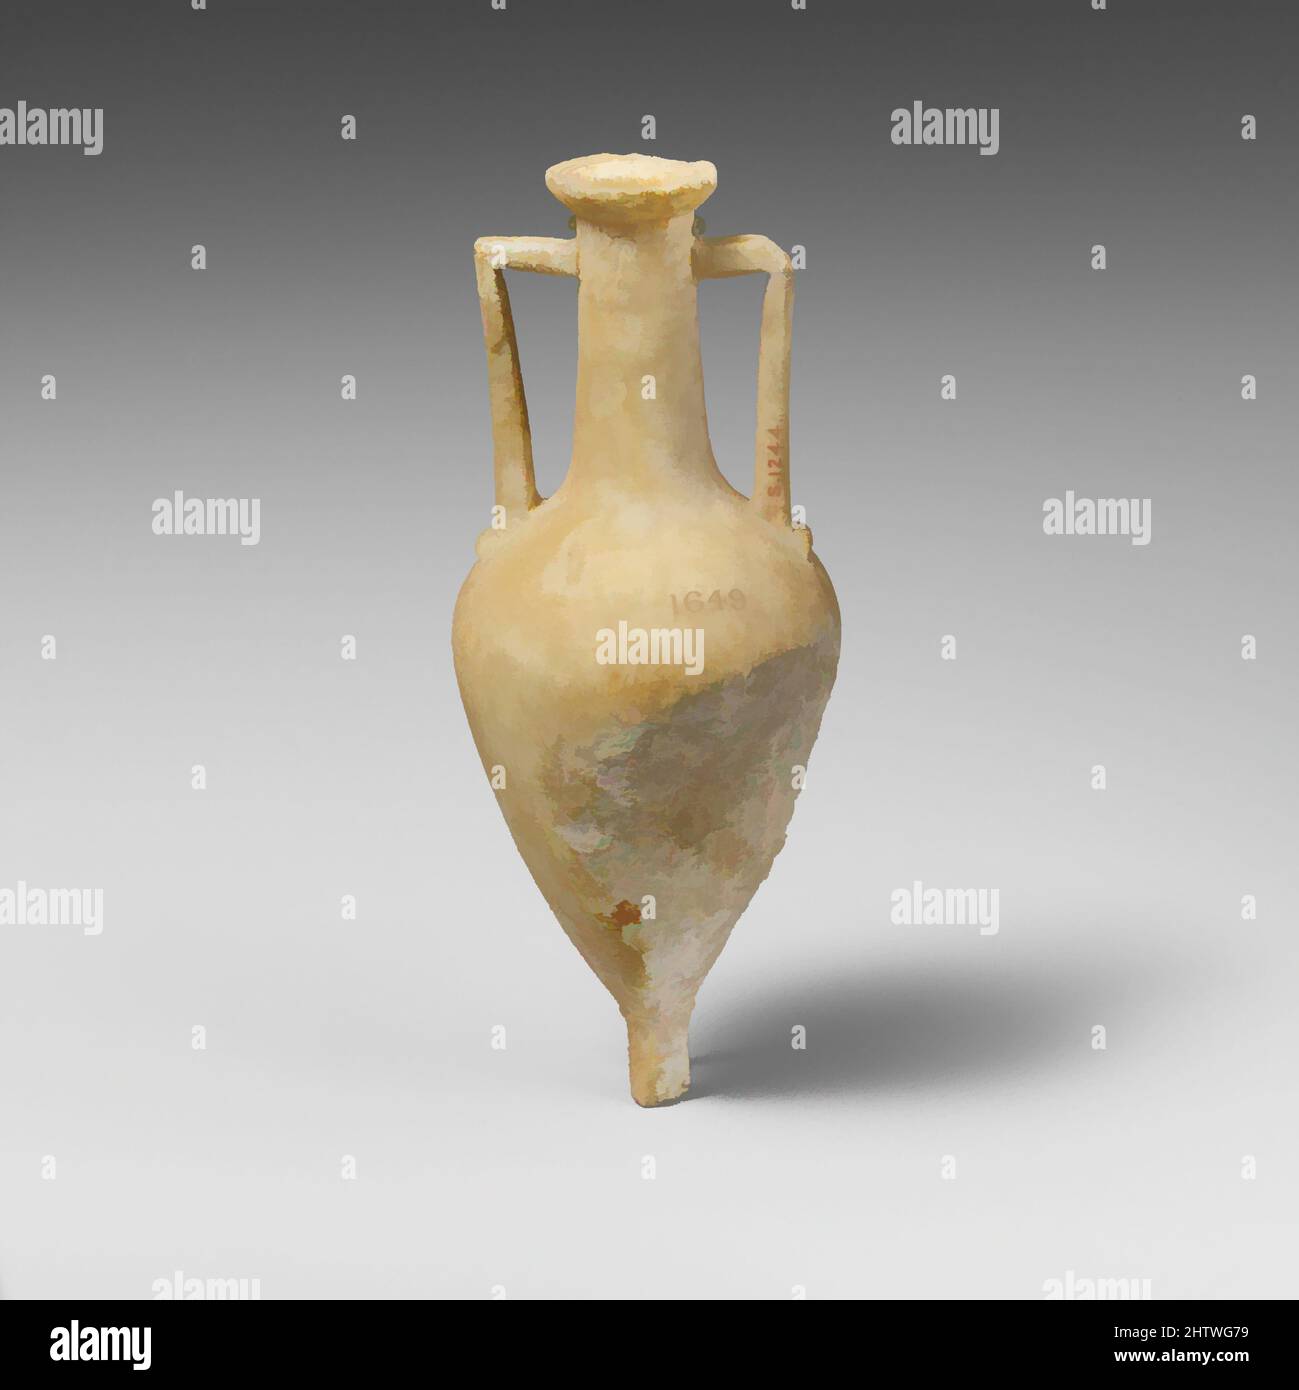 Art inspired by Alabaster amphoriskos (small flask), Hellenistic, 310–30 B.C., Cypriot, Gypsum (alabaster), H. 5 1/4 x 2 1/8 in. (13.3 x 5.4 cm), Miscellaneous-Stone Vases, With long neck, high handles and pointed base, Classic works modernized by Artotop with a splash of modernity. Shapes, color and value, eye-catching visual impact on art. Emotions through freedom of artworks in a contemporary way. A timeless message pursuing a wildly creative new direction. Artists turning to the digital medium and creating the Artotop NFT Stock Photo